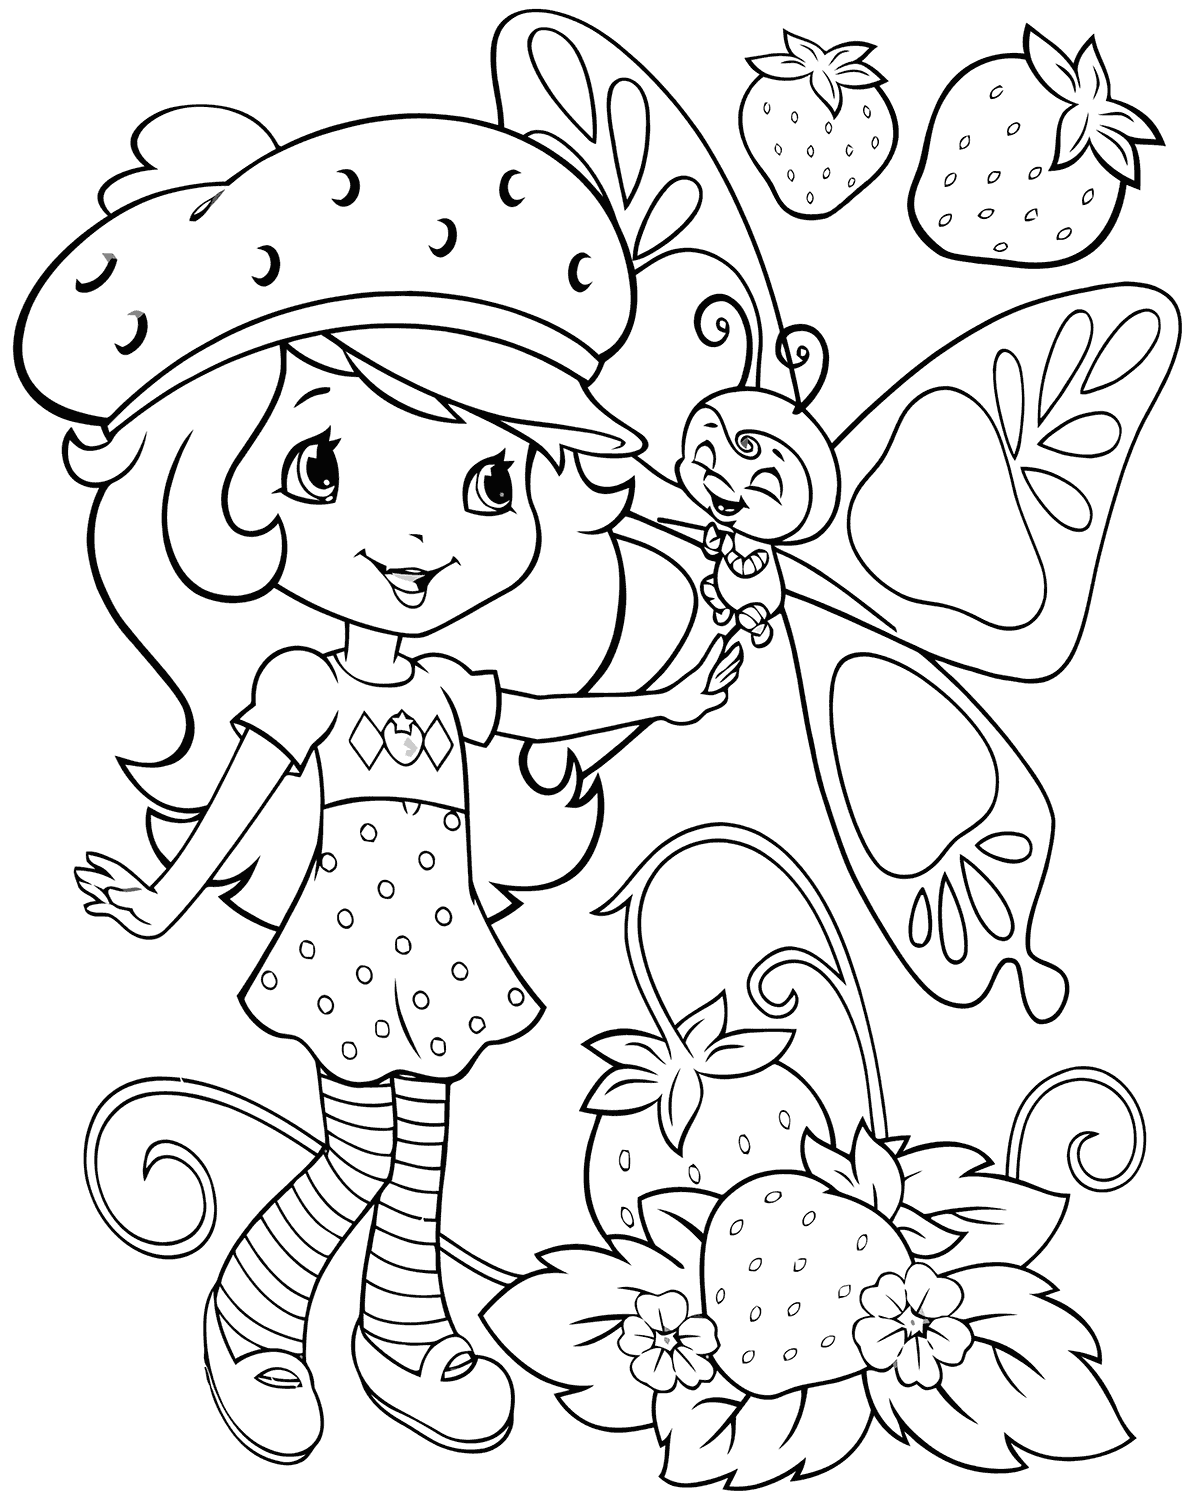 strawberry shortcake free coloring pages